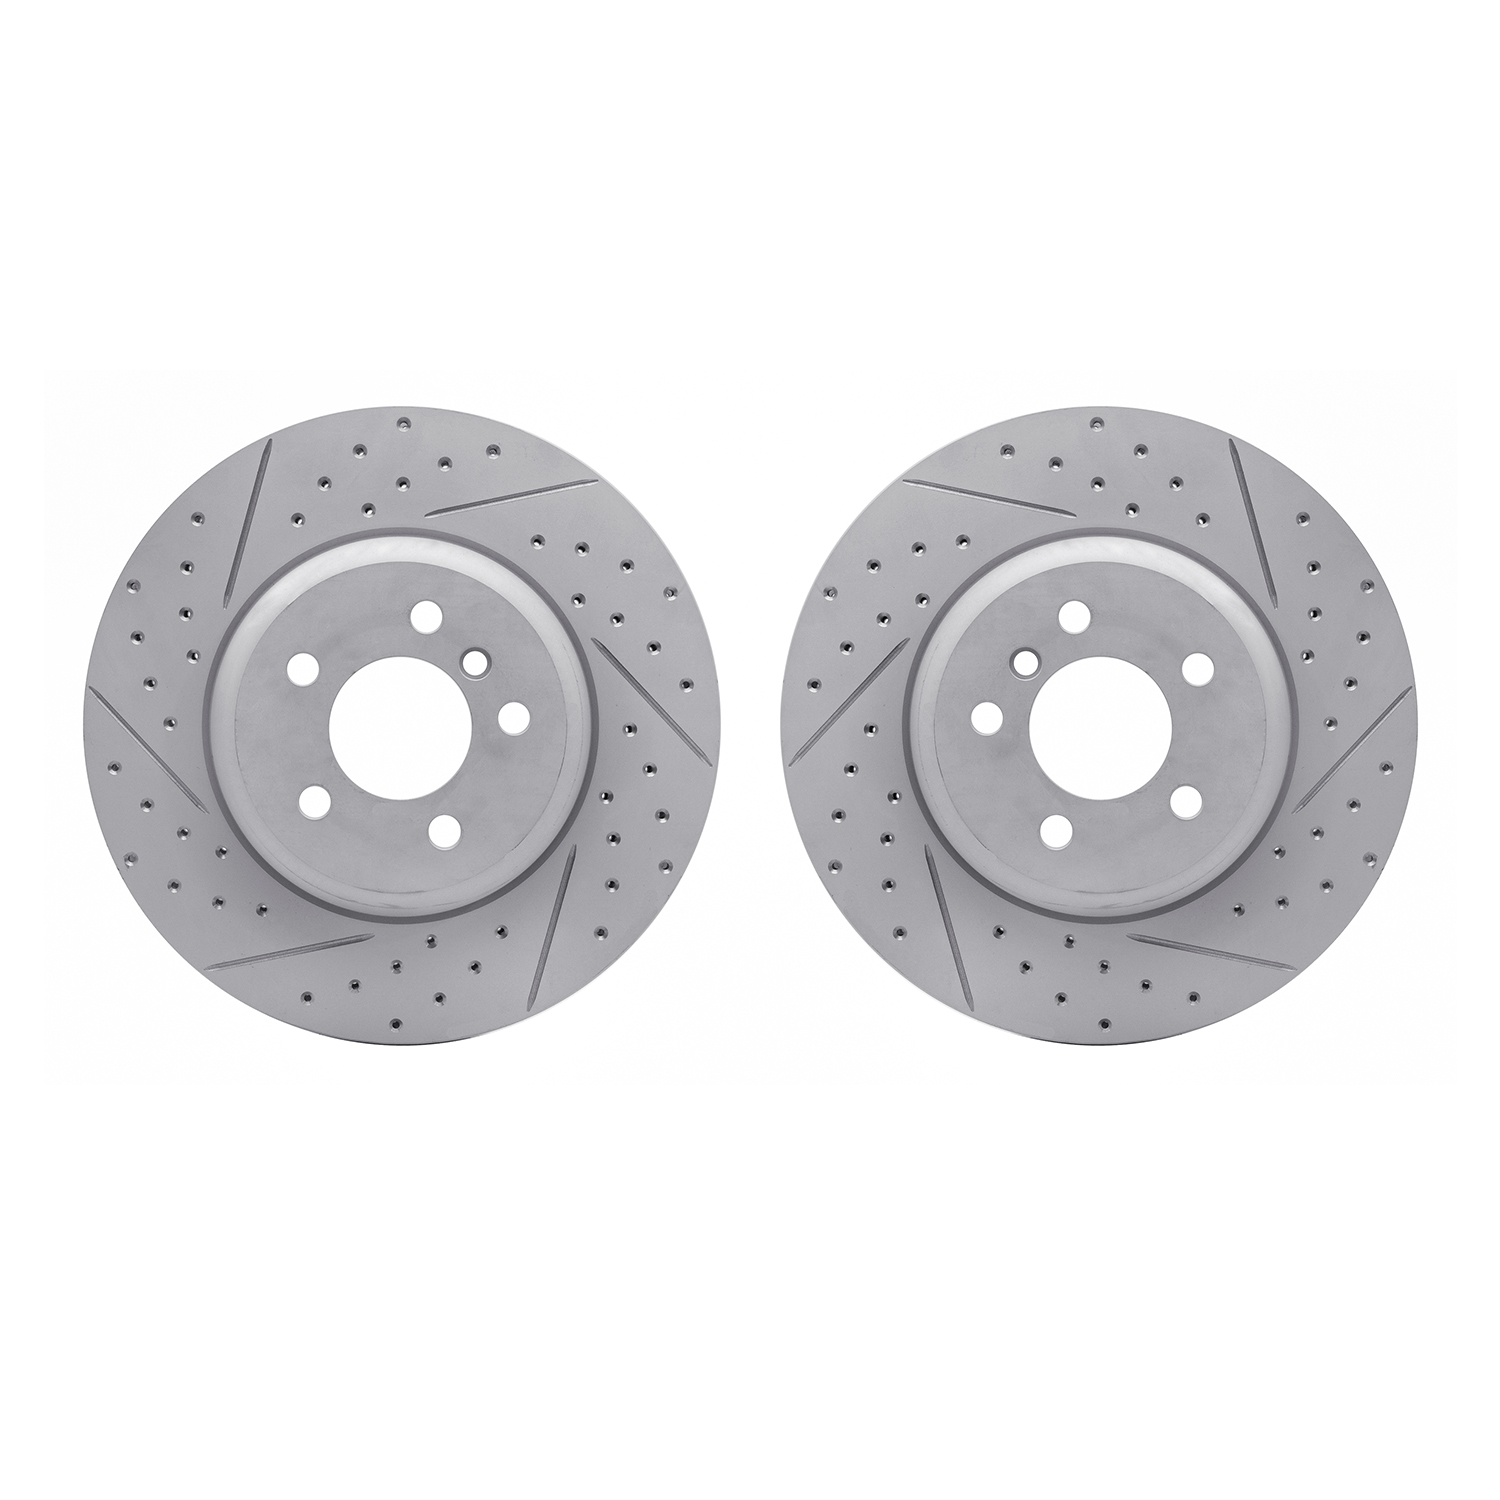 2002-31024 Geoperformance Drilled/Slotted Brake Rotors, 2011-2019 BMW, Position: Front